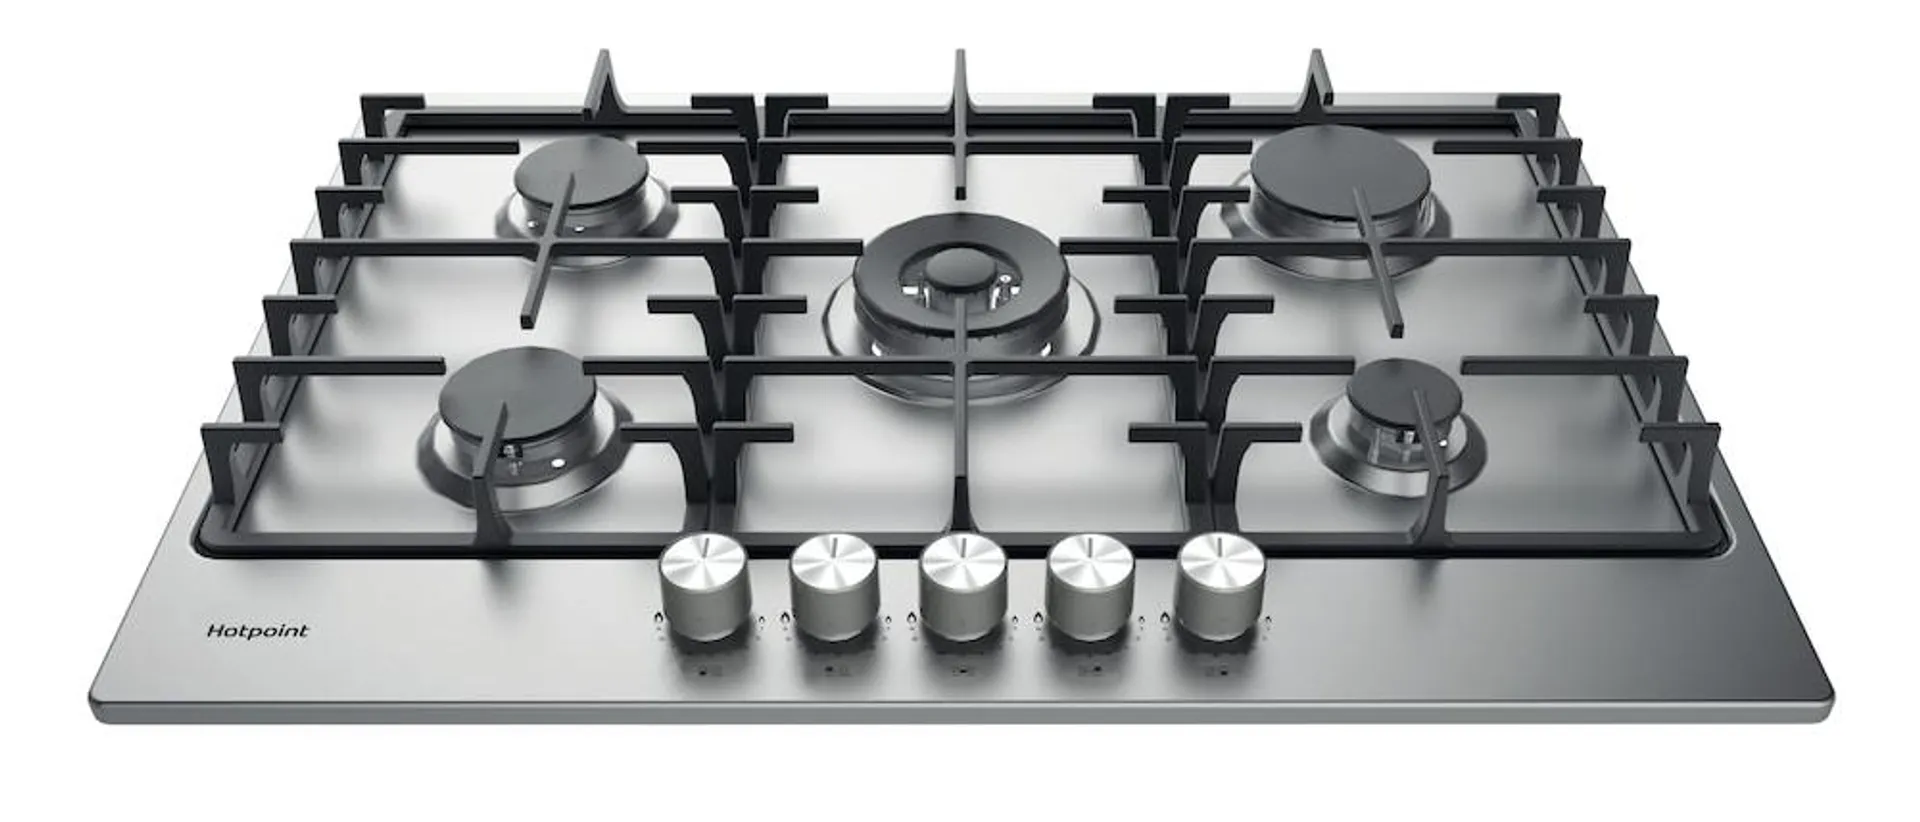 HOTPOINT 75Ccm 5 Ring Gas Hob – Stainless Steel